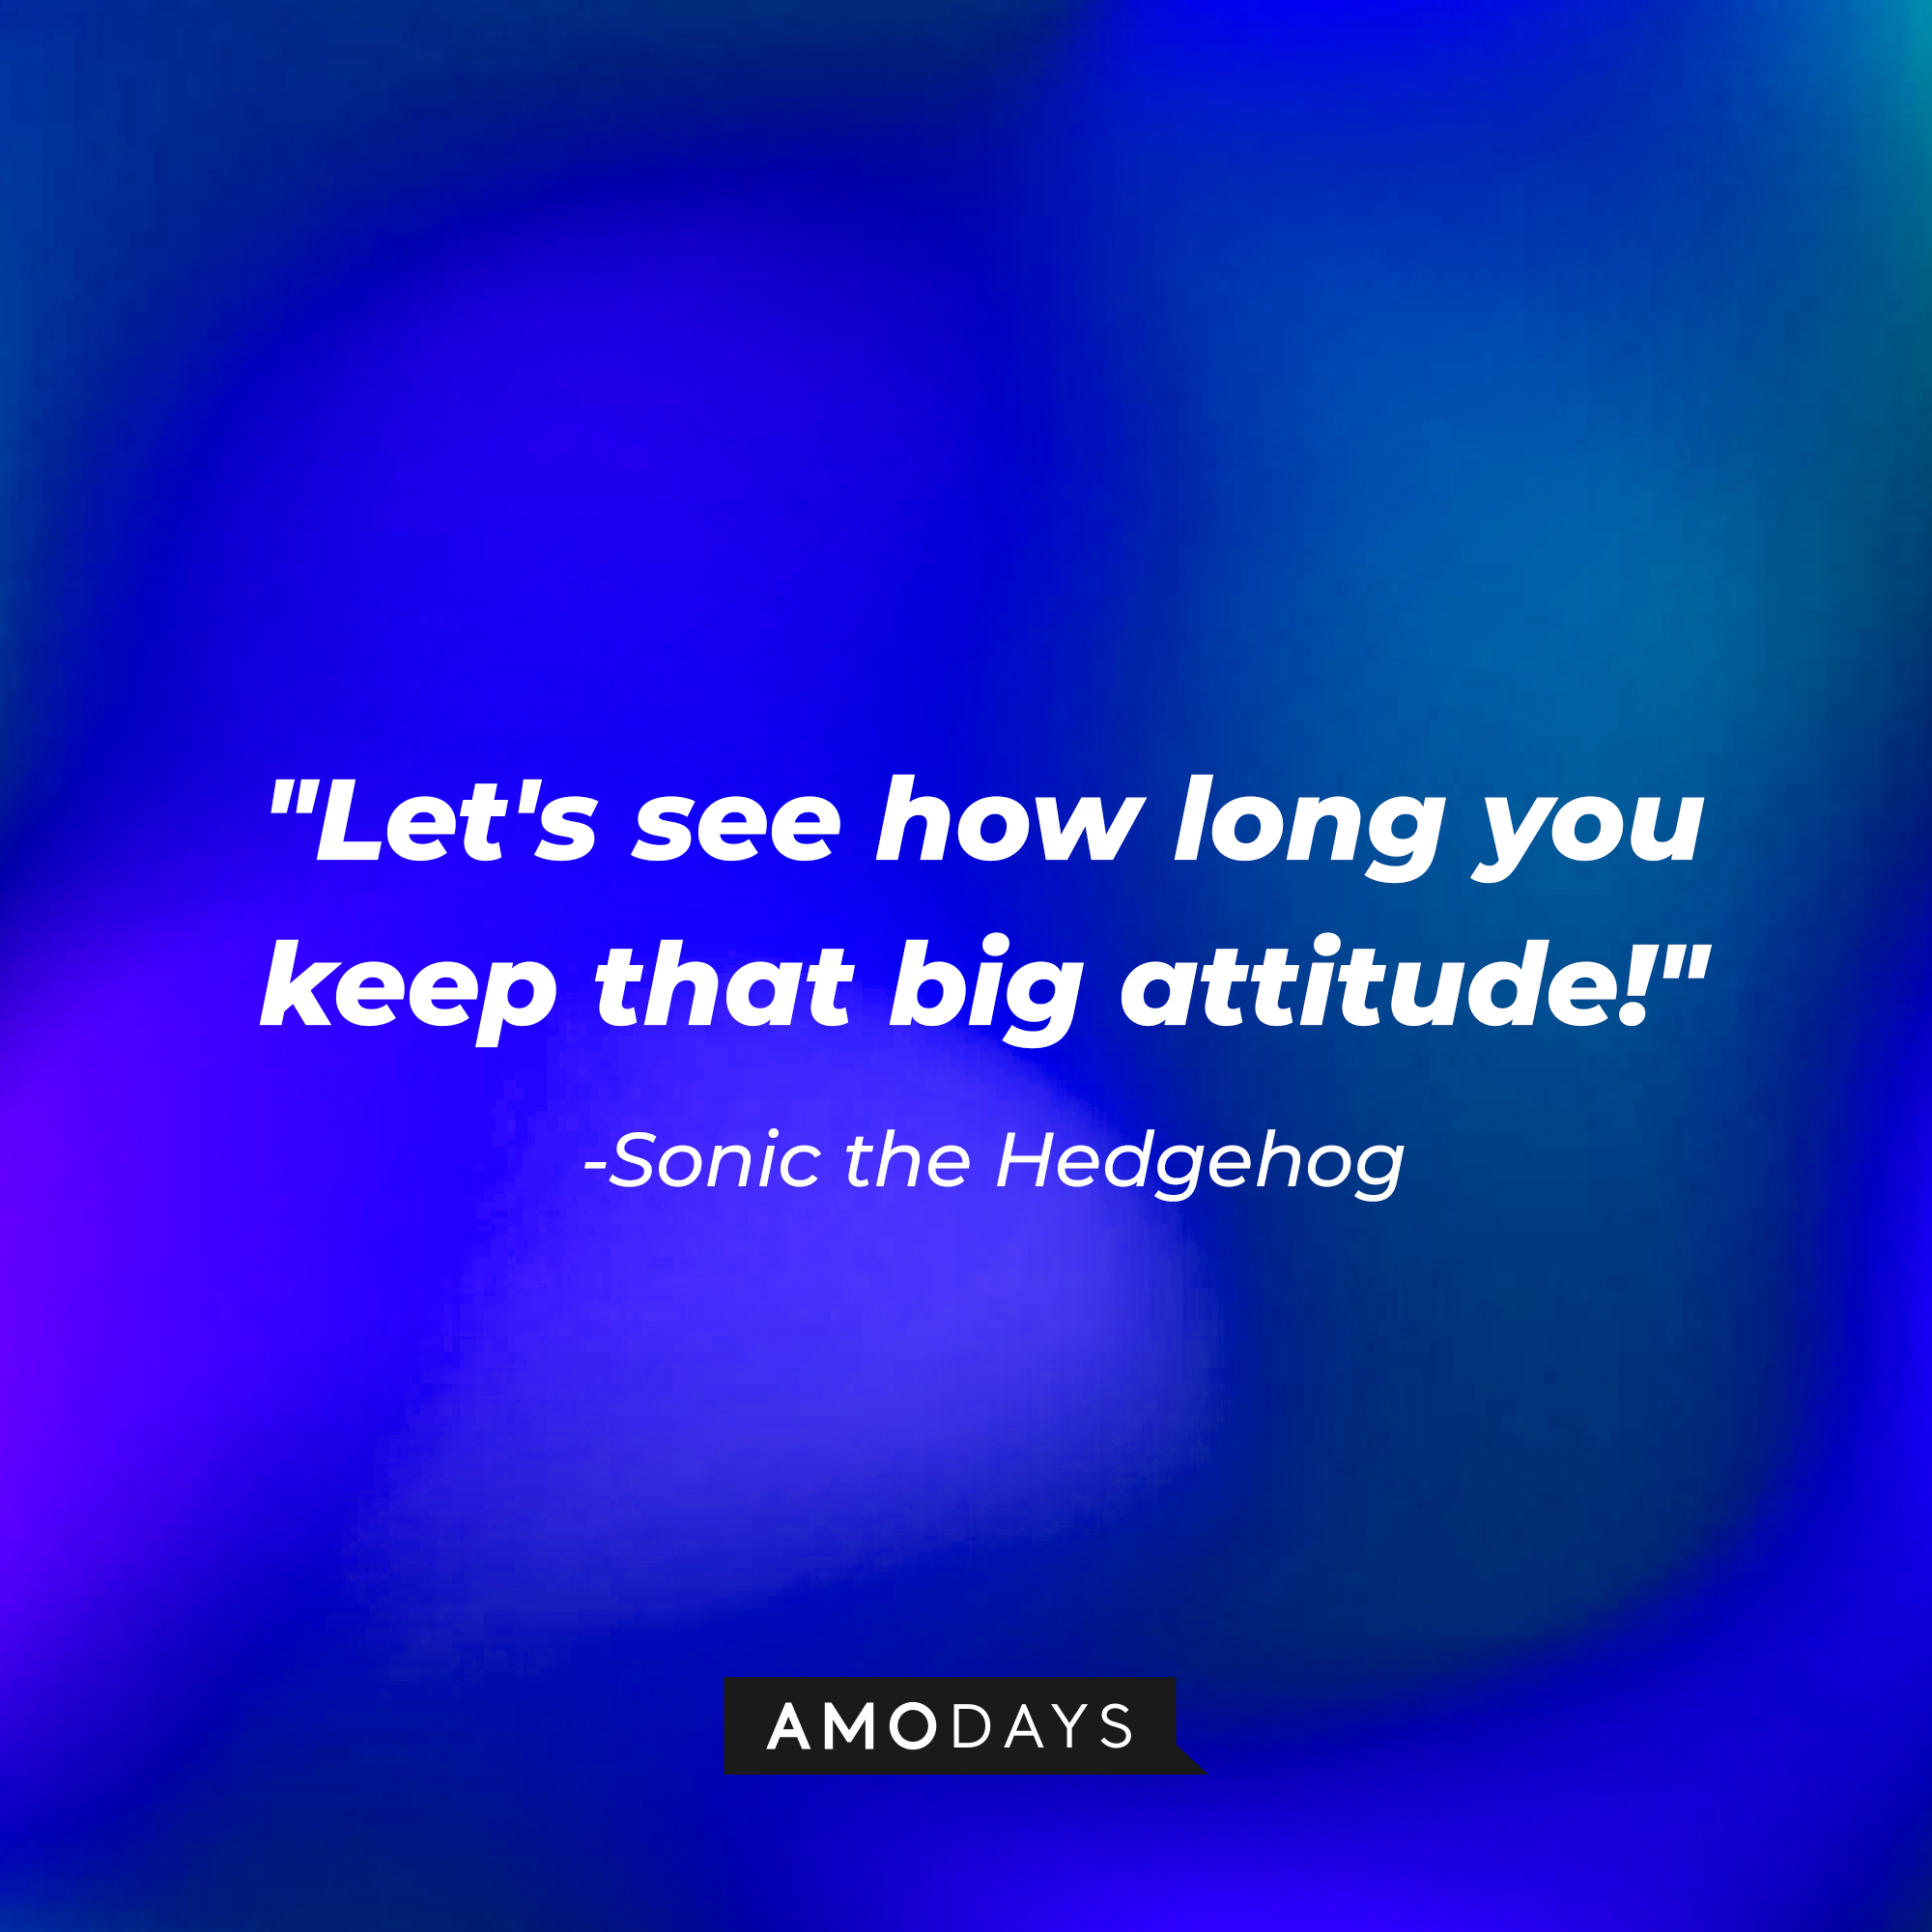 Sonic's quote: "Let's see how long you keep that big attitude!" | Source: Amodays